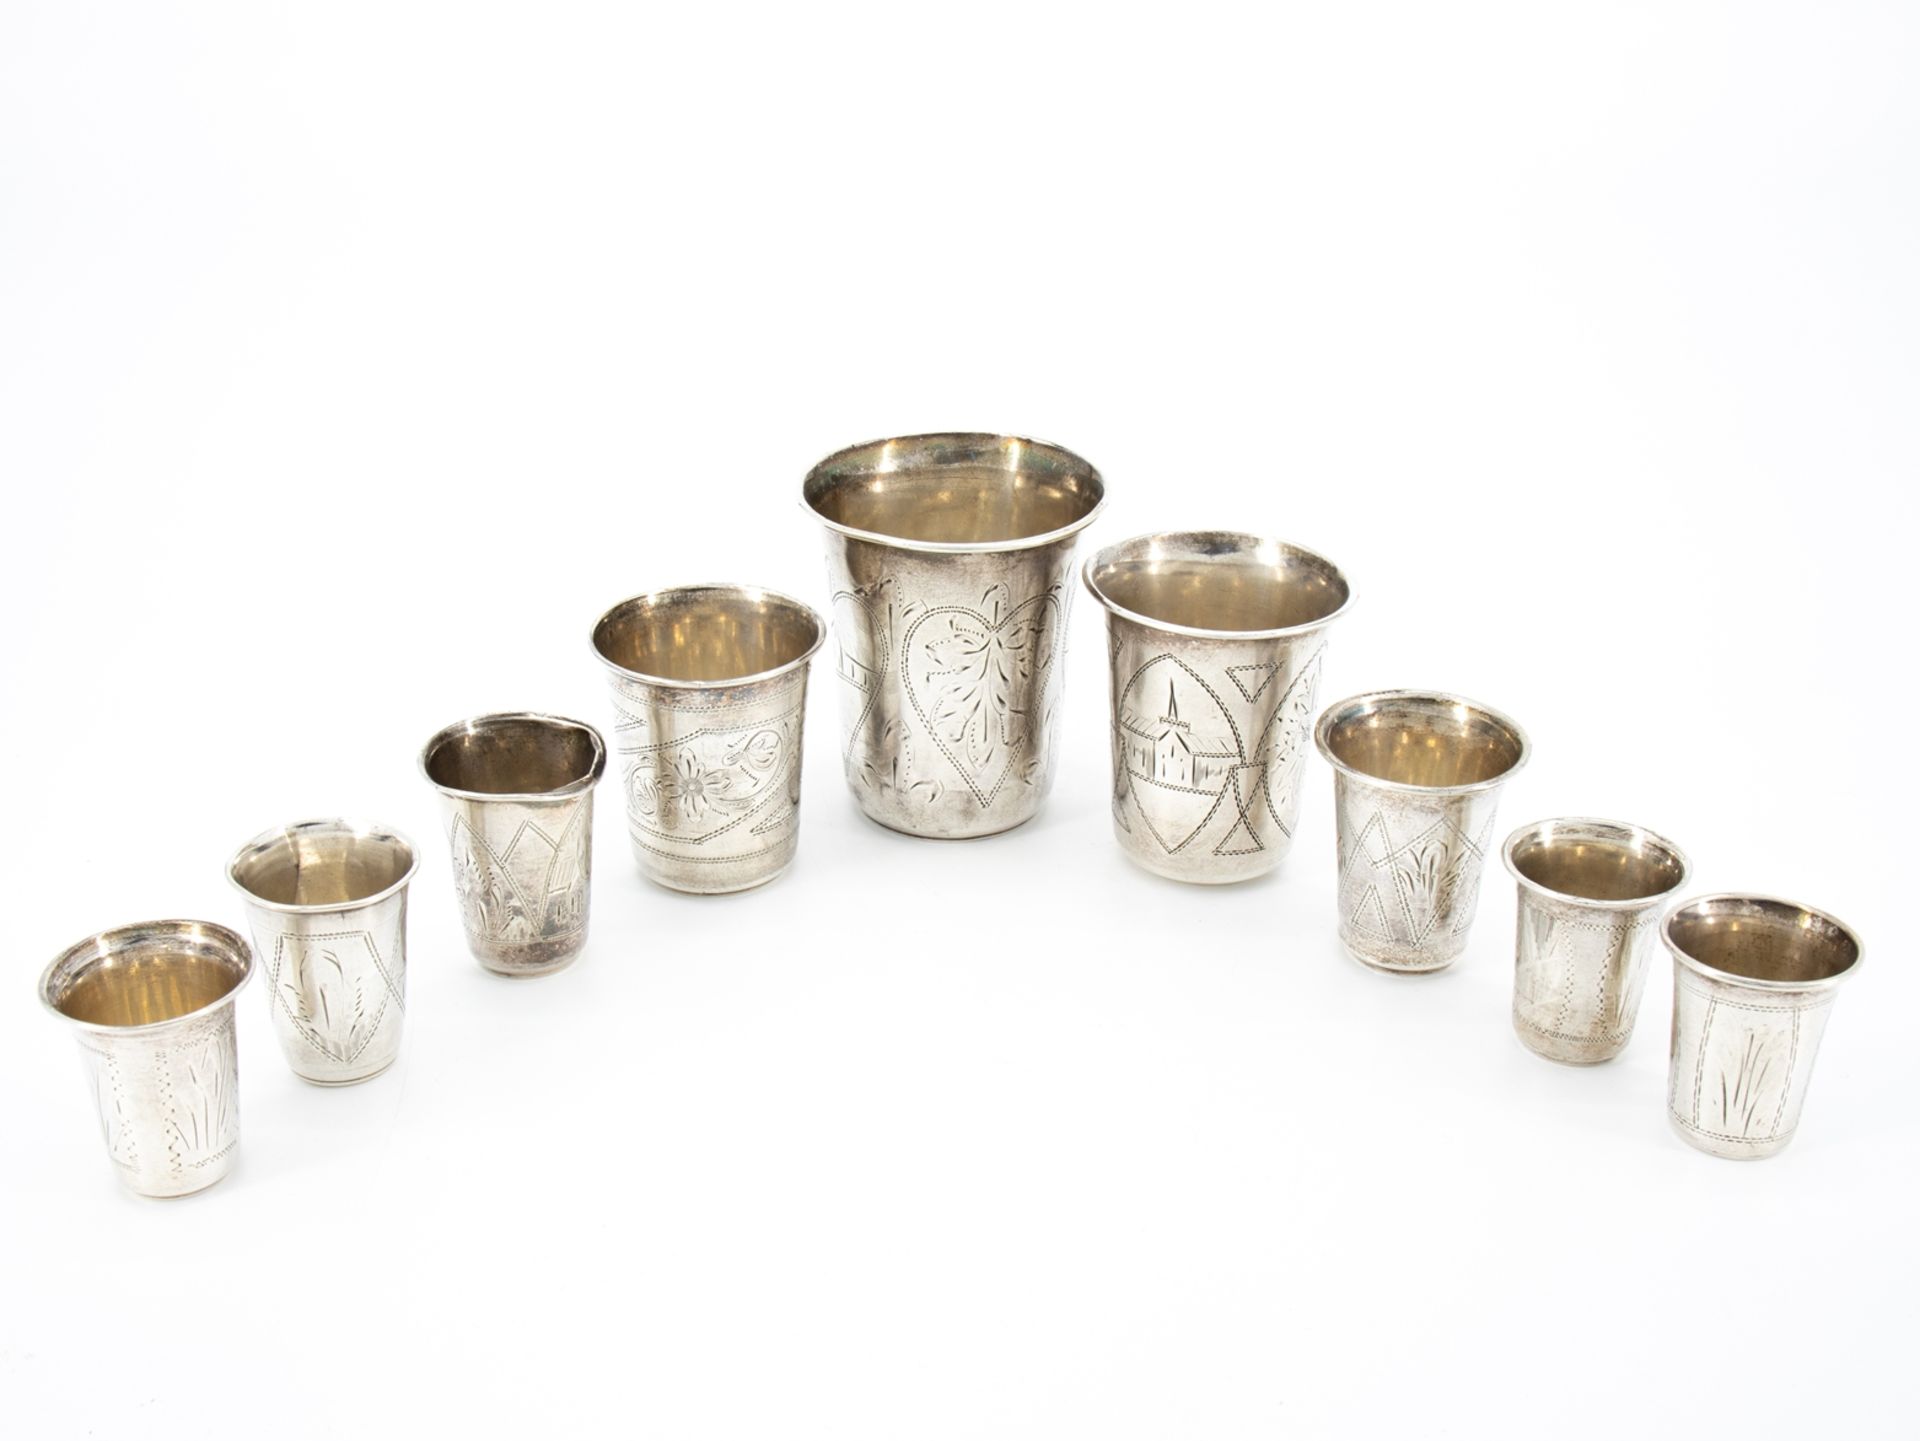 9 Silver cups, 84 Zolotniki, Russia, Baltic States c. 1900 - Image 10 of 10